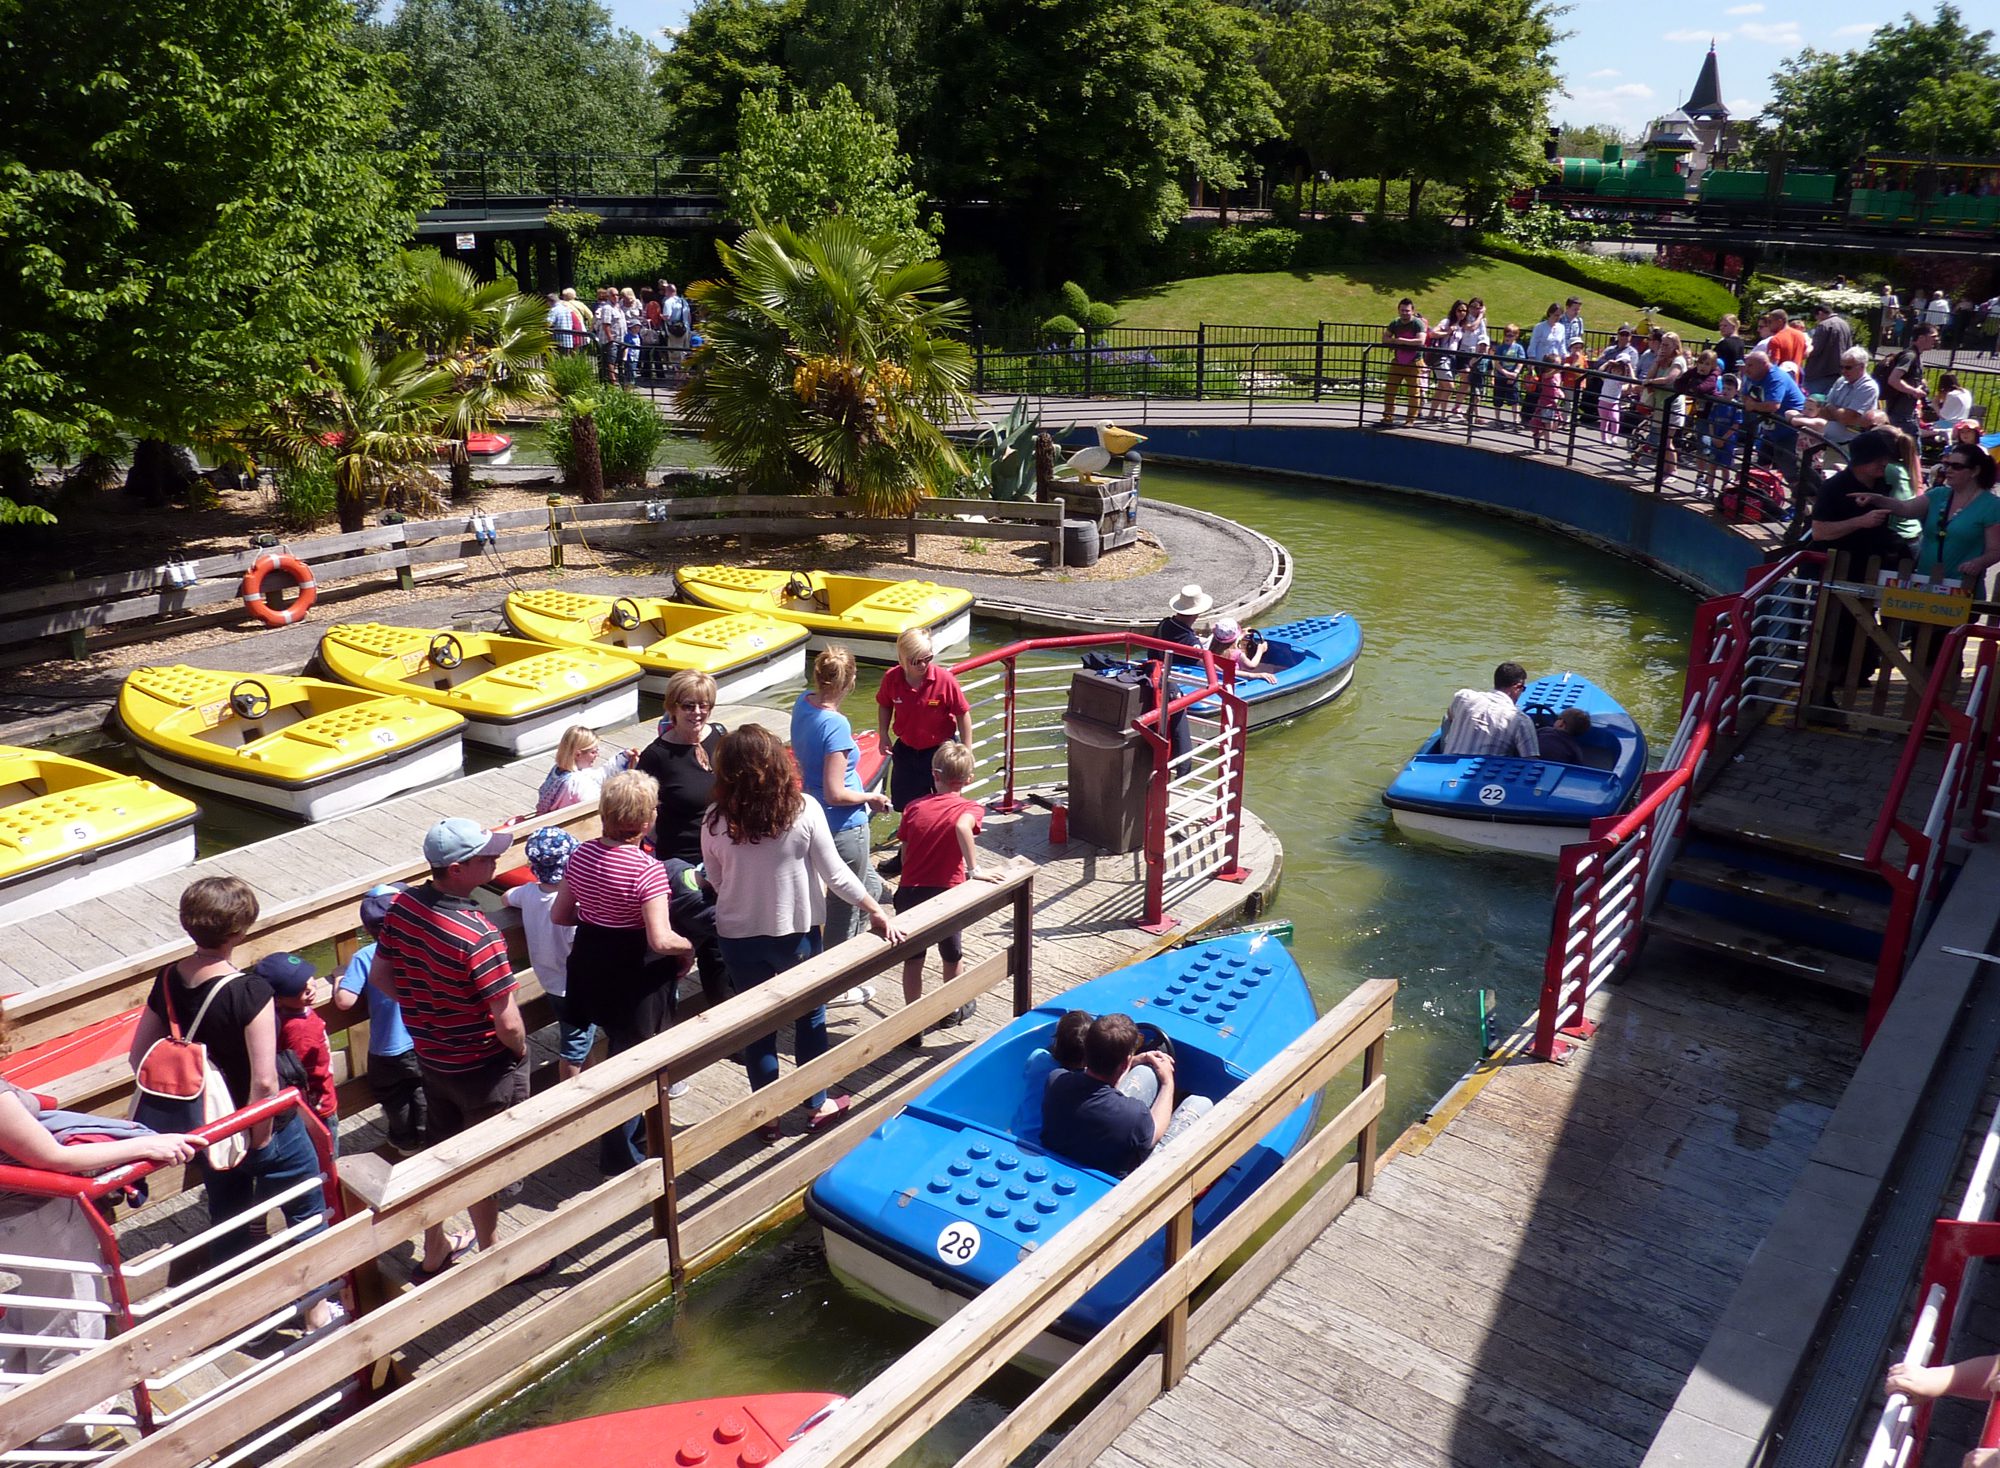 A water LEGO themed station area with people and blue and yellow boats